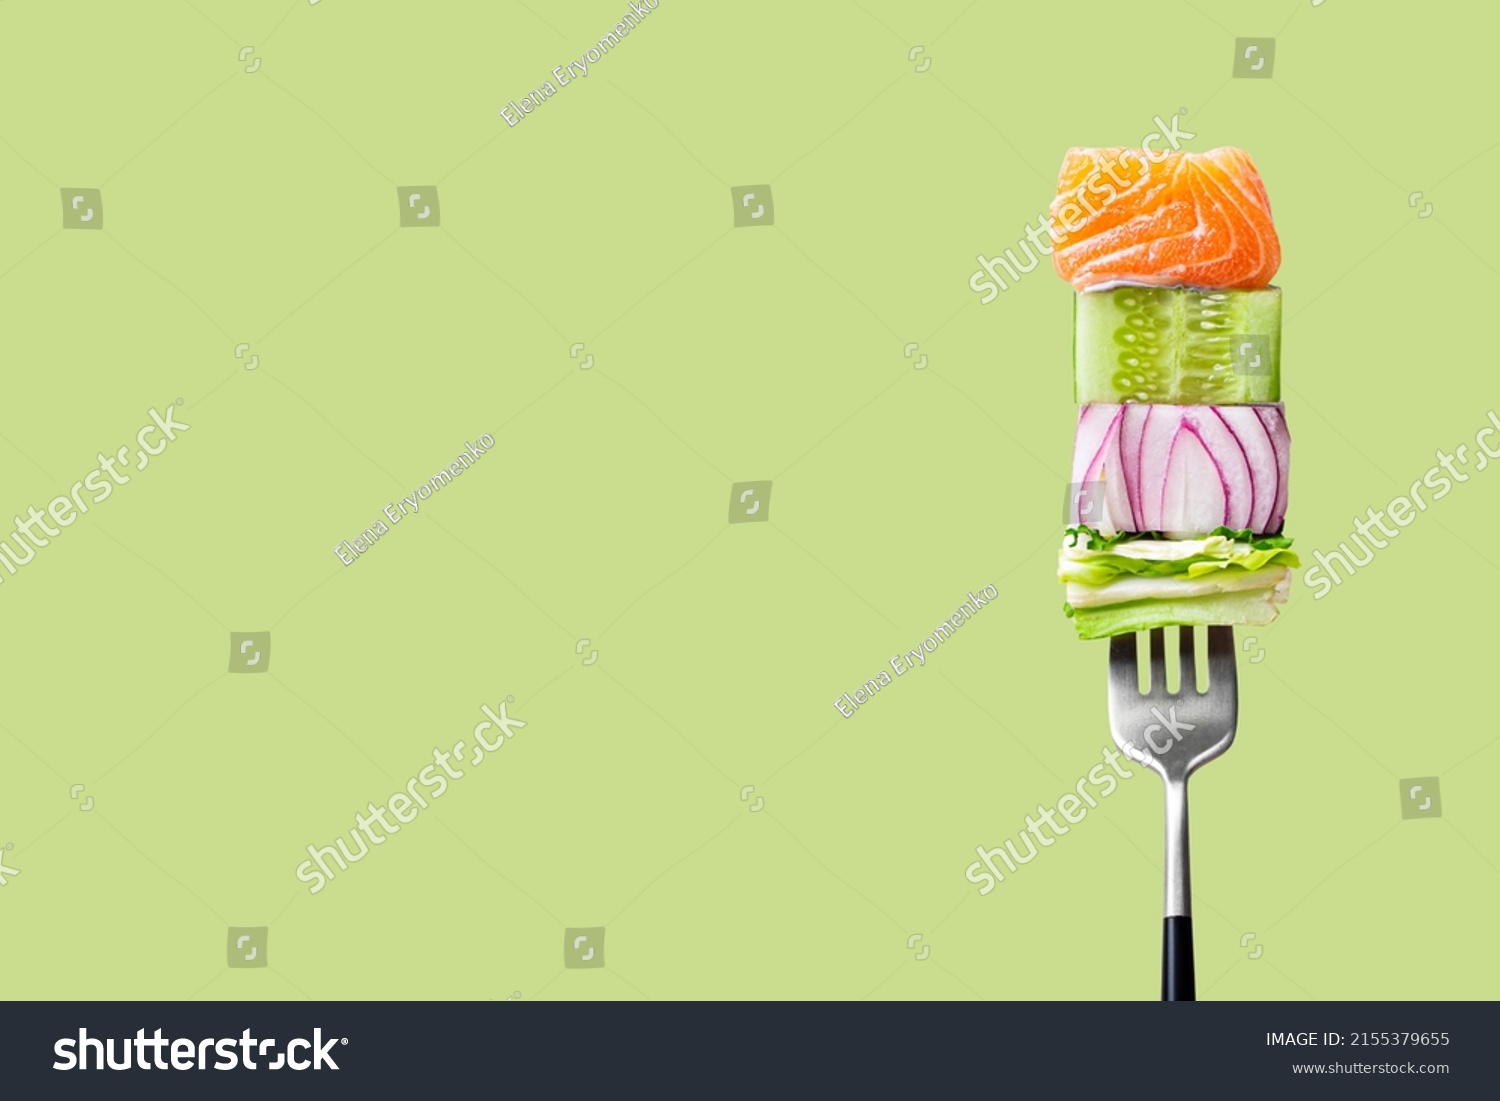 Close-up of fork with food on it: delicious fillet salmon, cucumber, onion, green salad on green background. Concept of healthy diet and clean eating, balanced nutrition space for text #2155379655